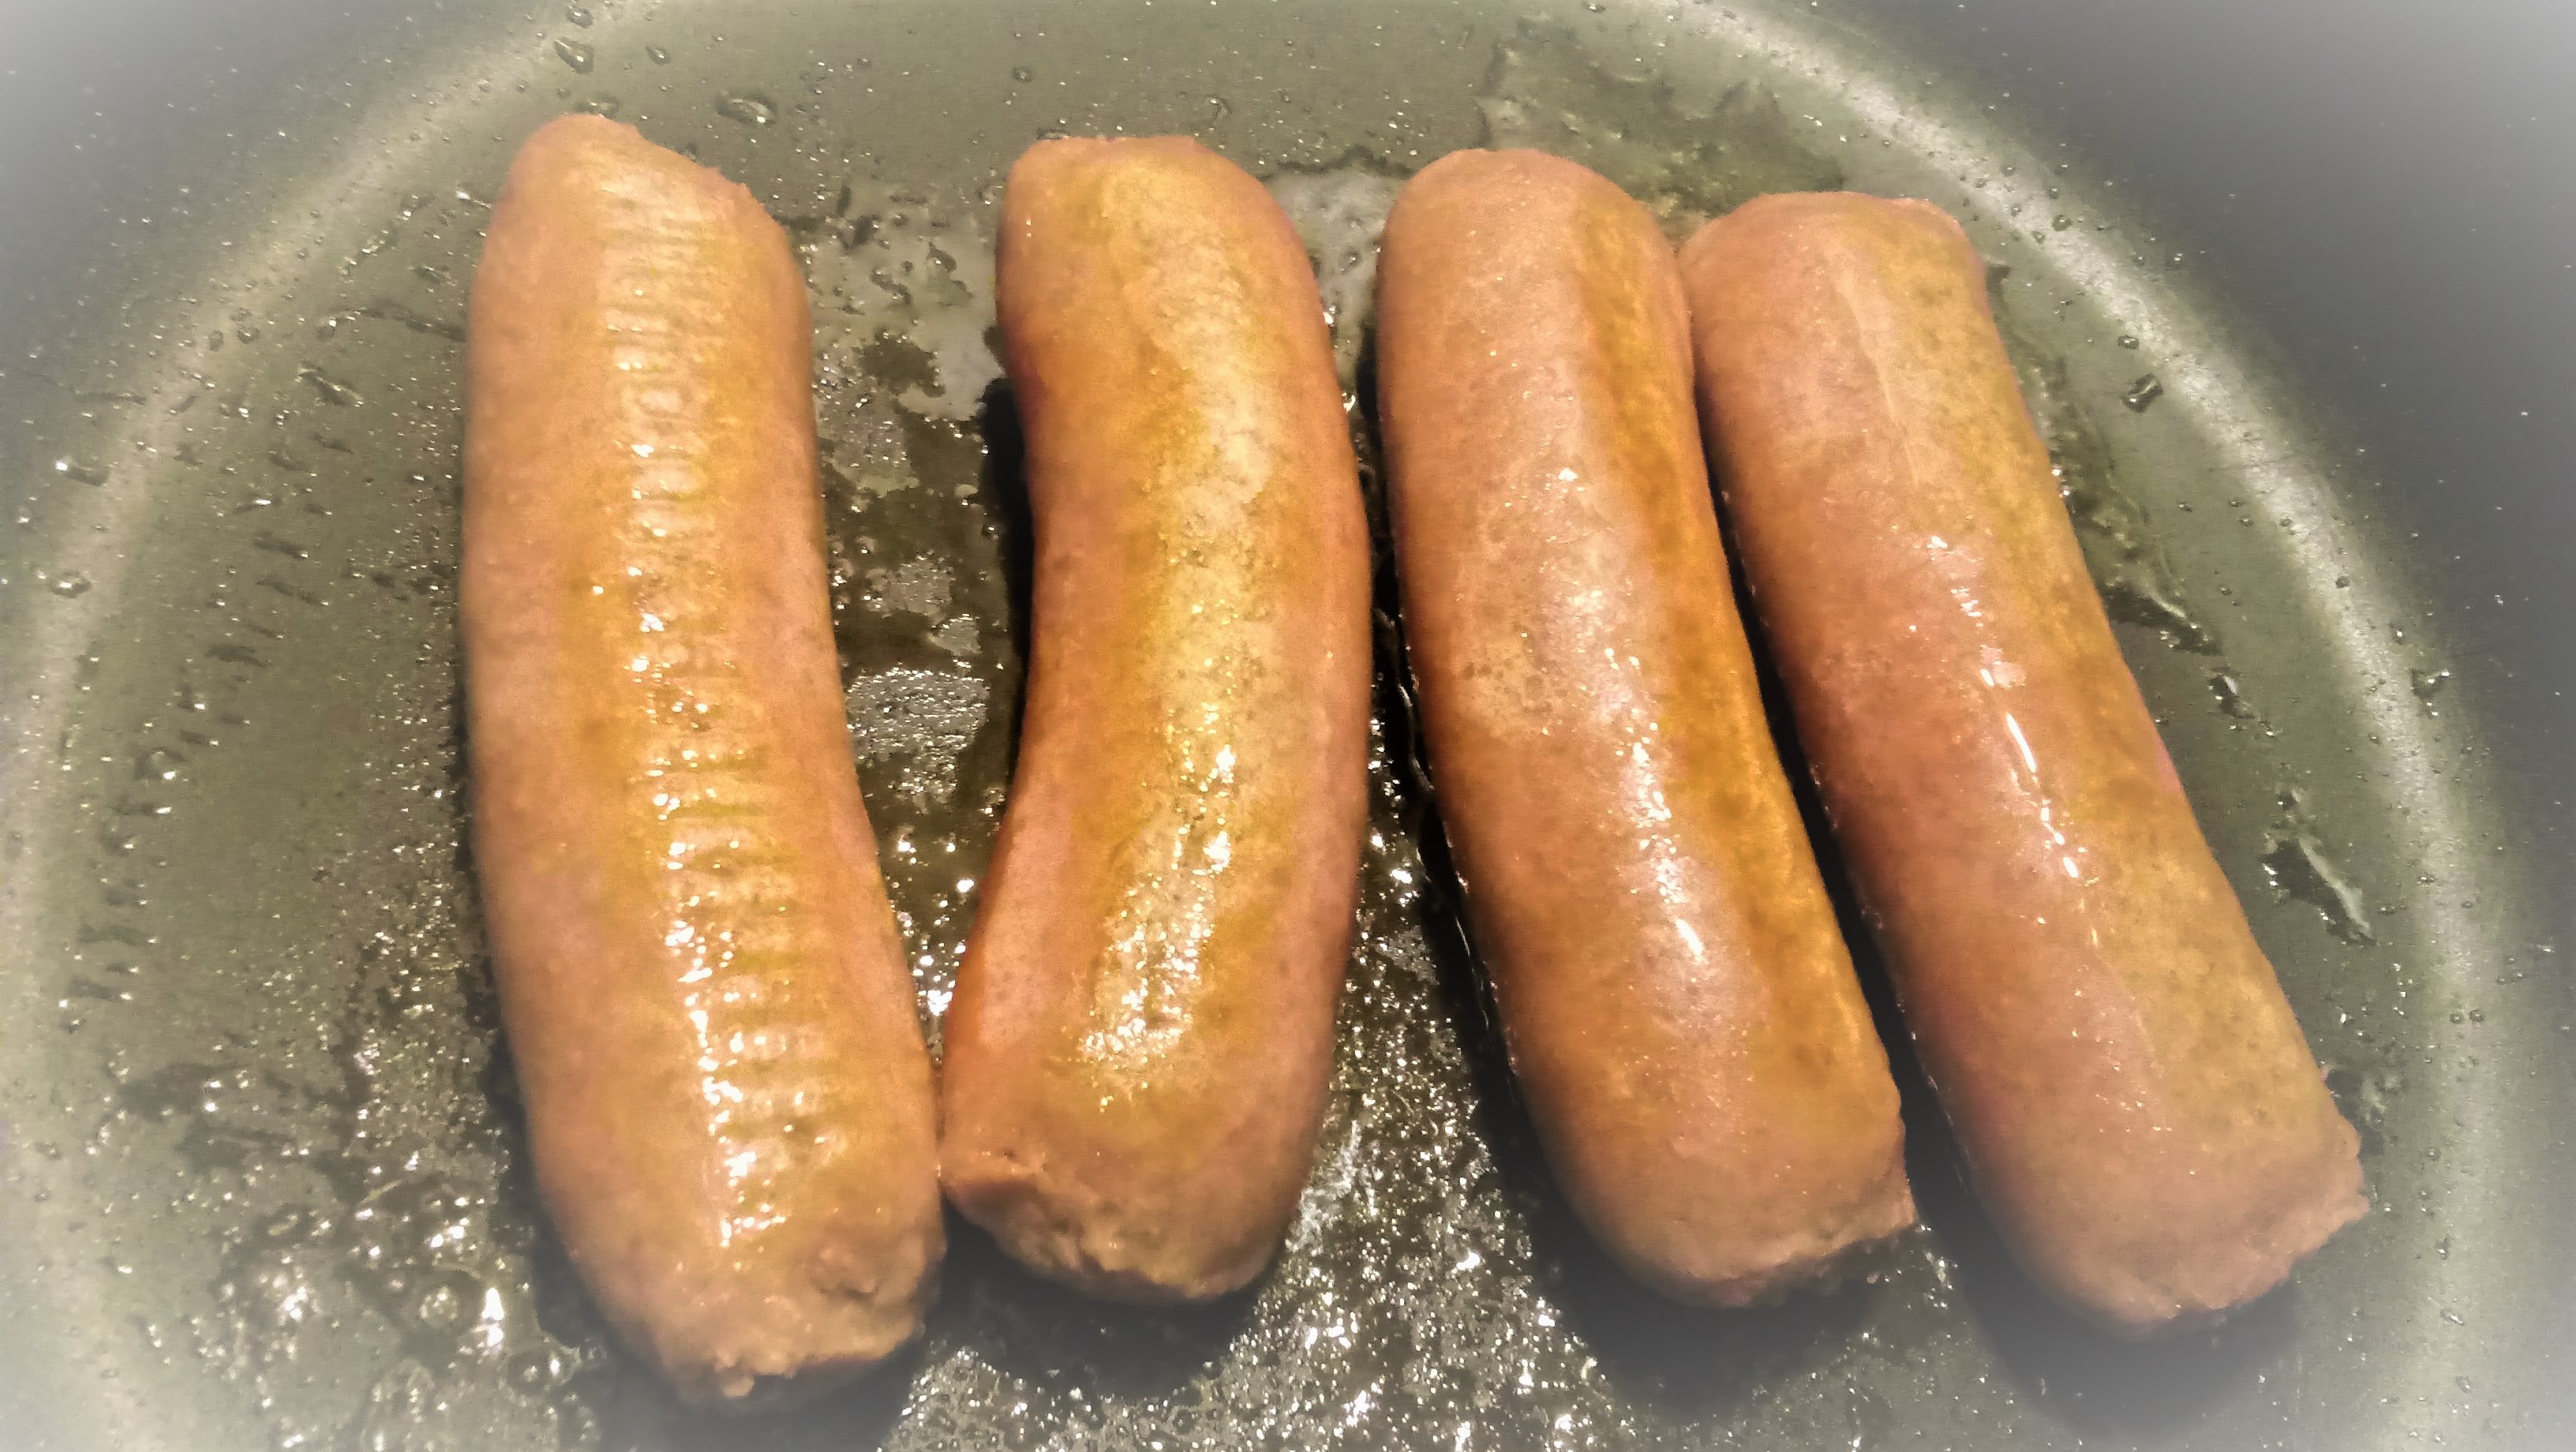 Four Beyond Meat plant-based sausages cooking in a nonstick pan.